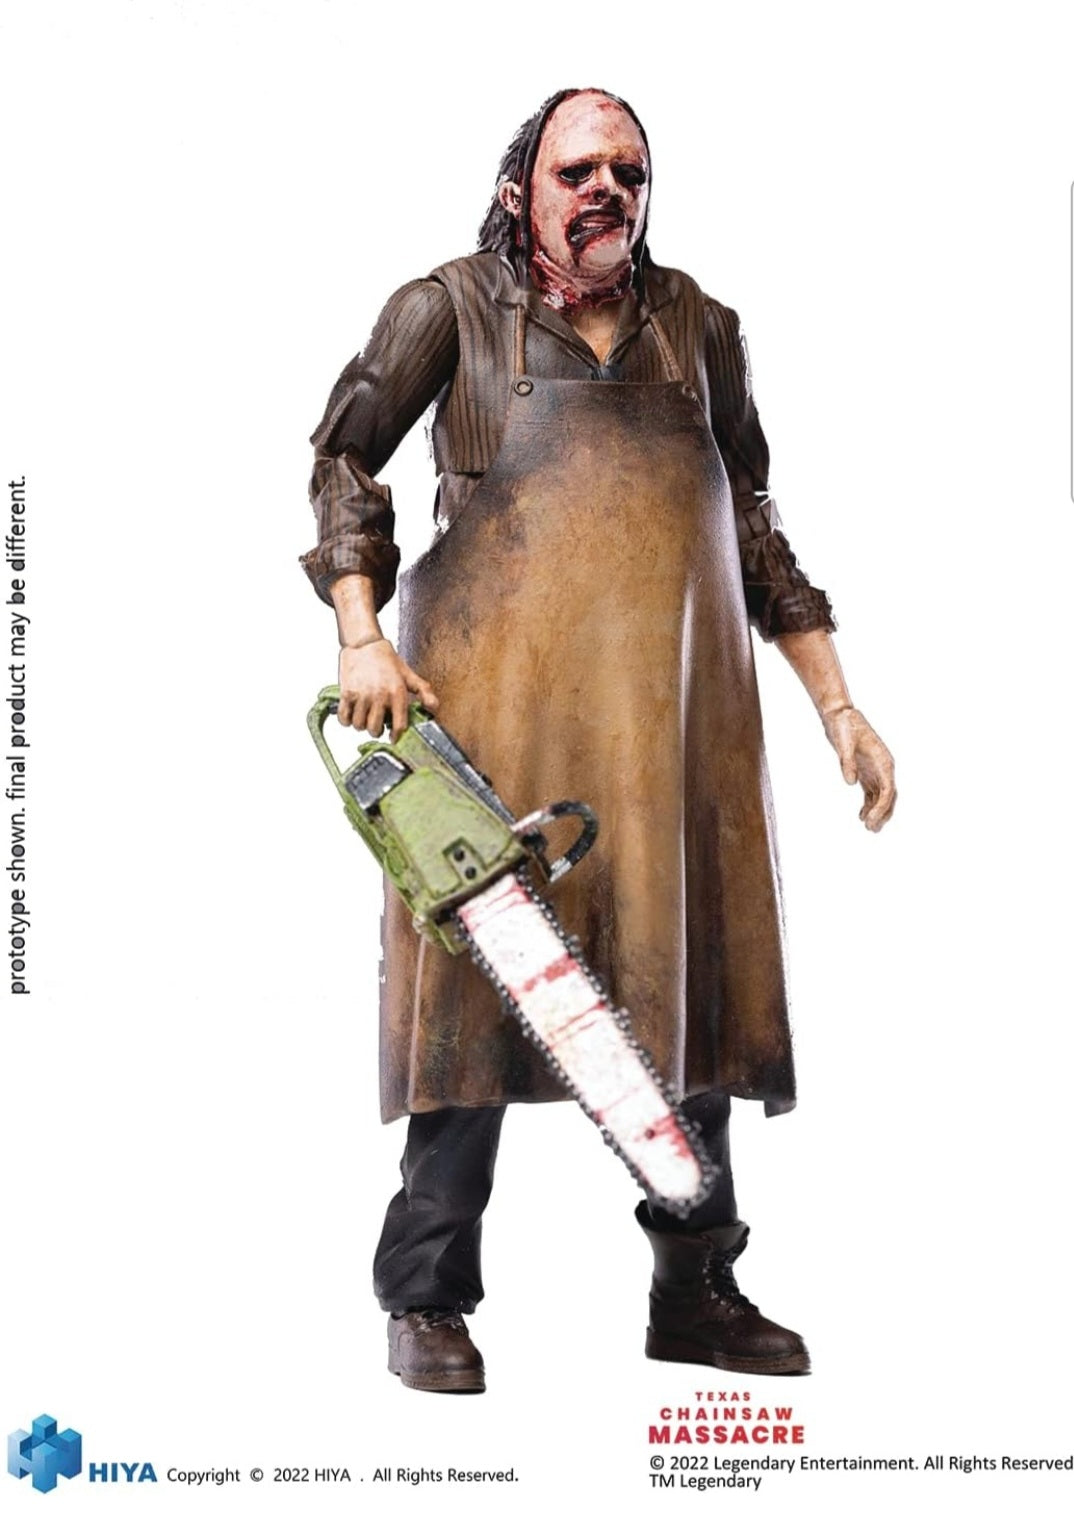 HIYA Texas Chainsaw Massacre 2022 Leatherface Slaughter Exquisite Mini 1:18 Scale Action Figure